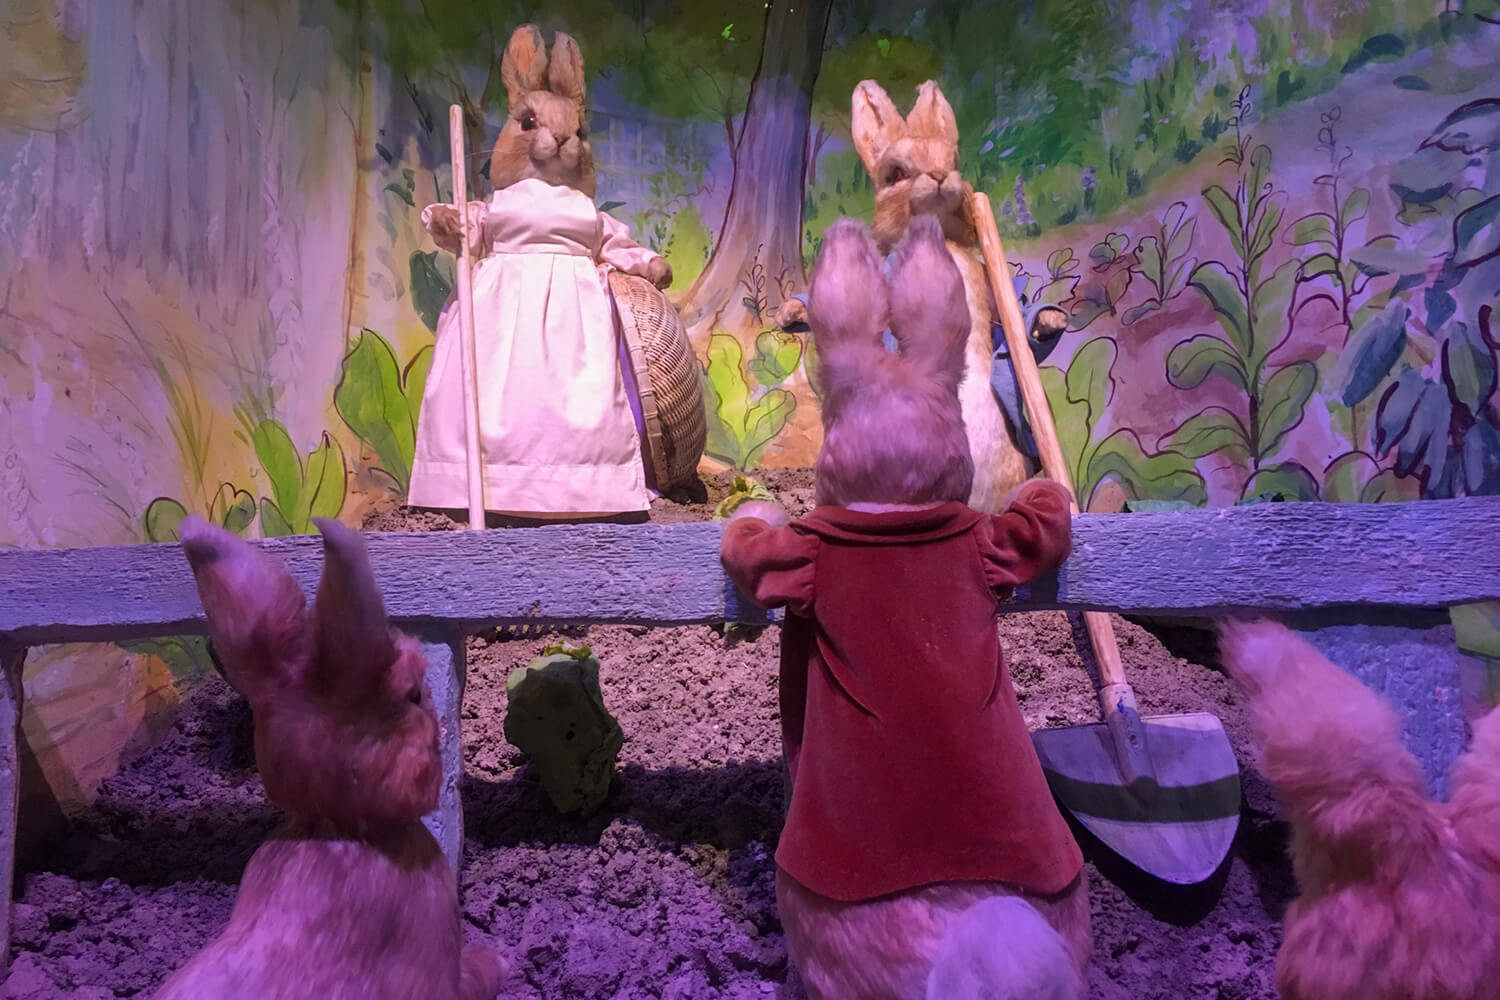 If you have a young family then a trip to the World of Beatrix Potter is an absolute must.